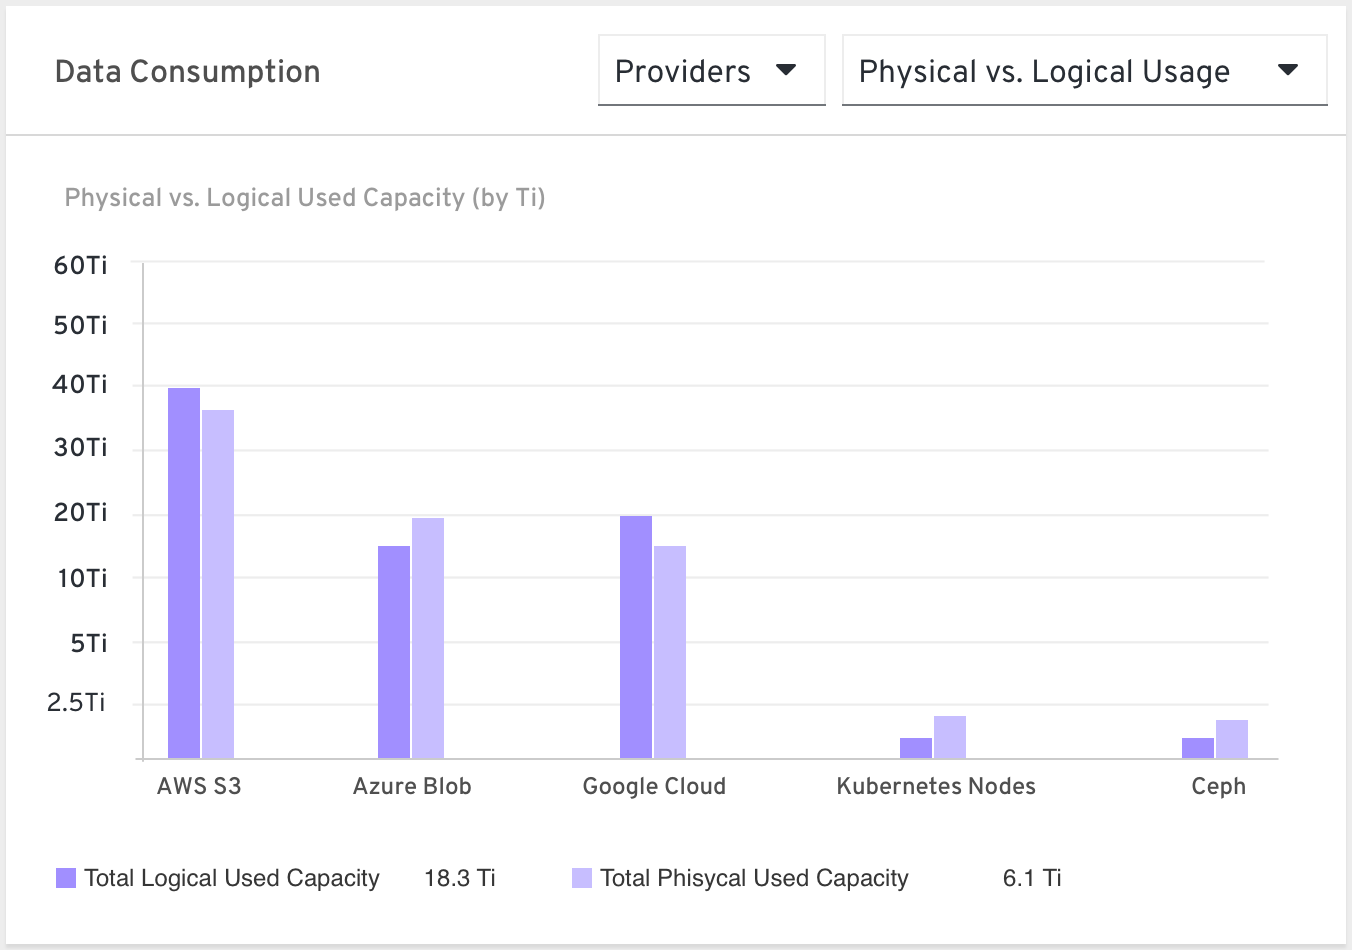 Providers by Physical vs. logical usage